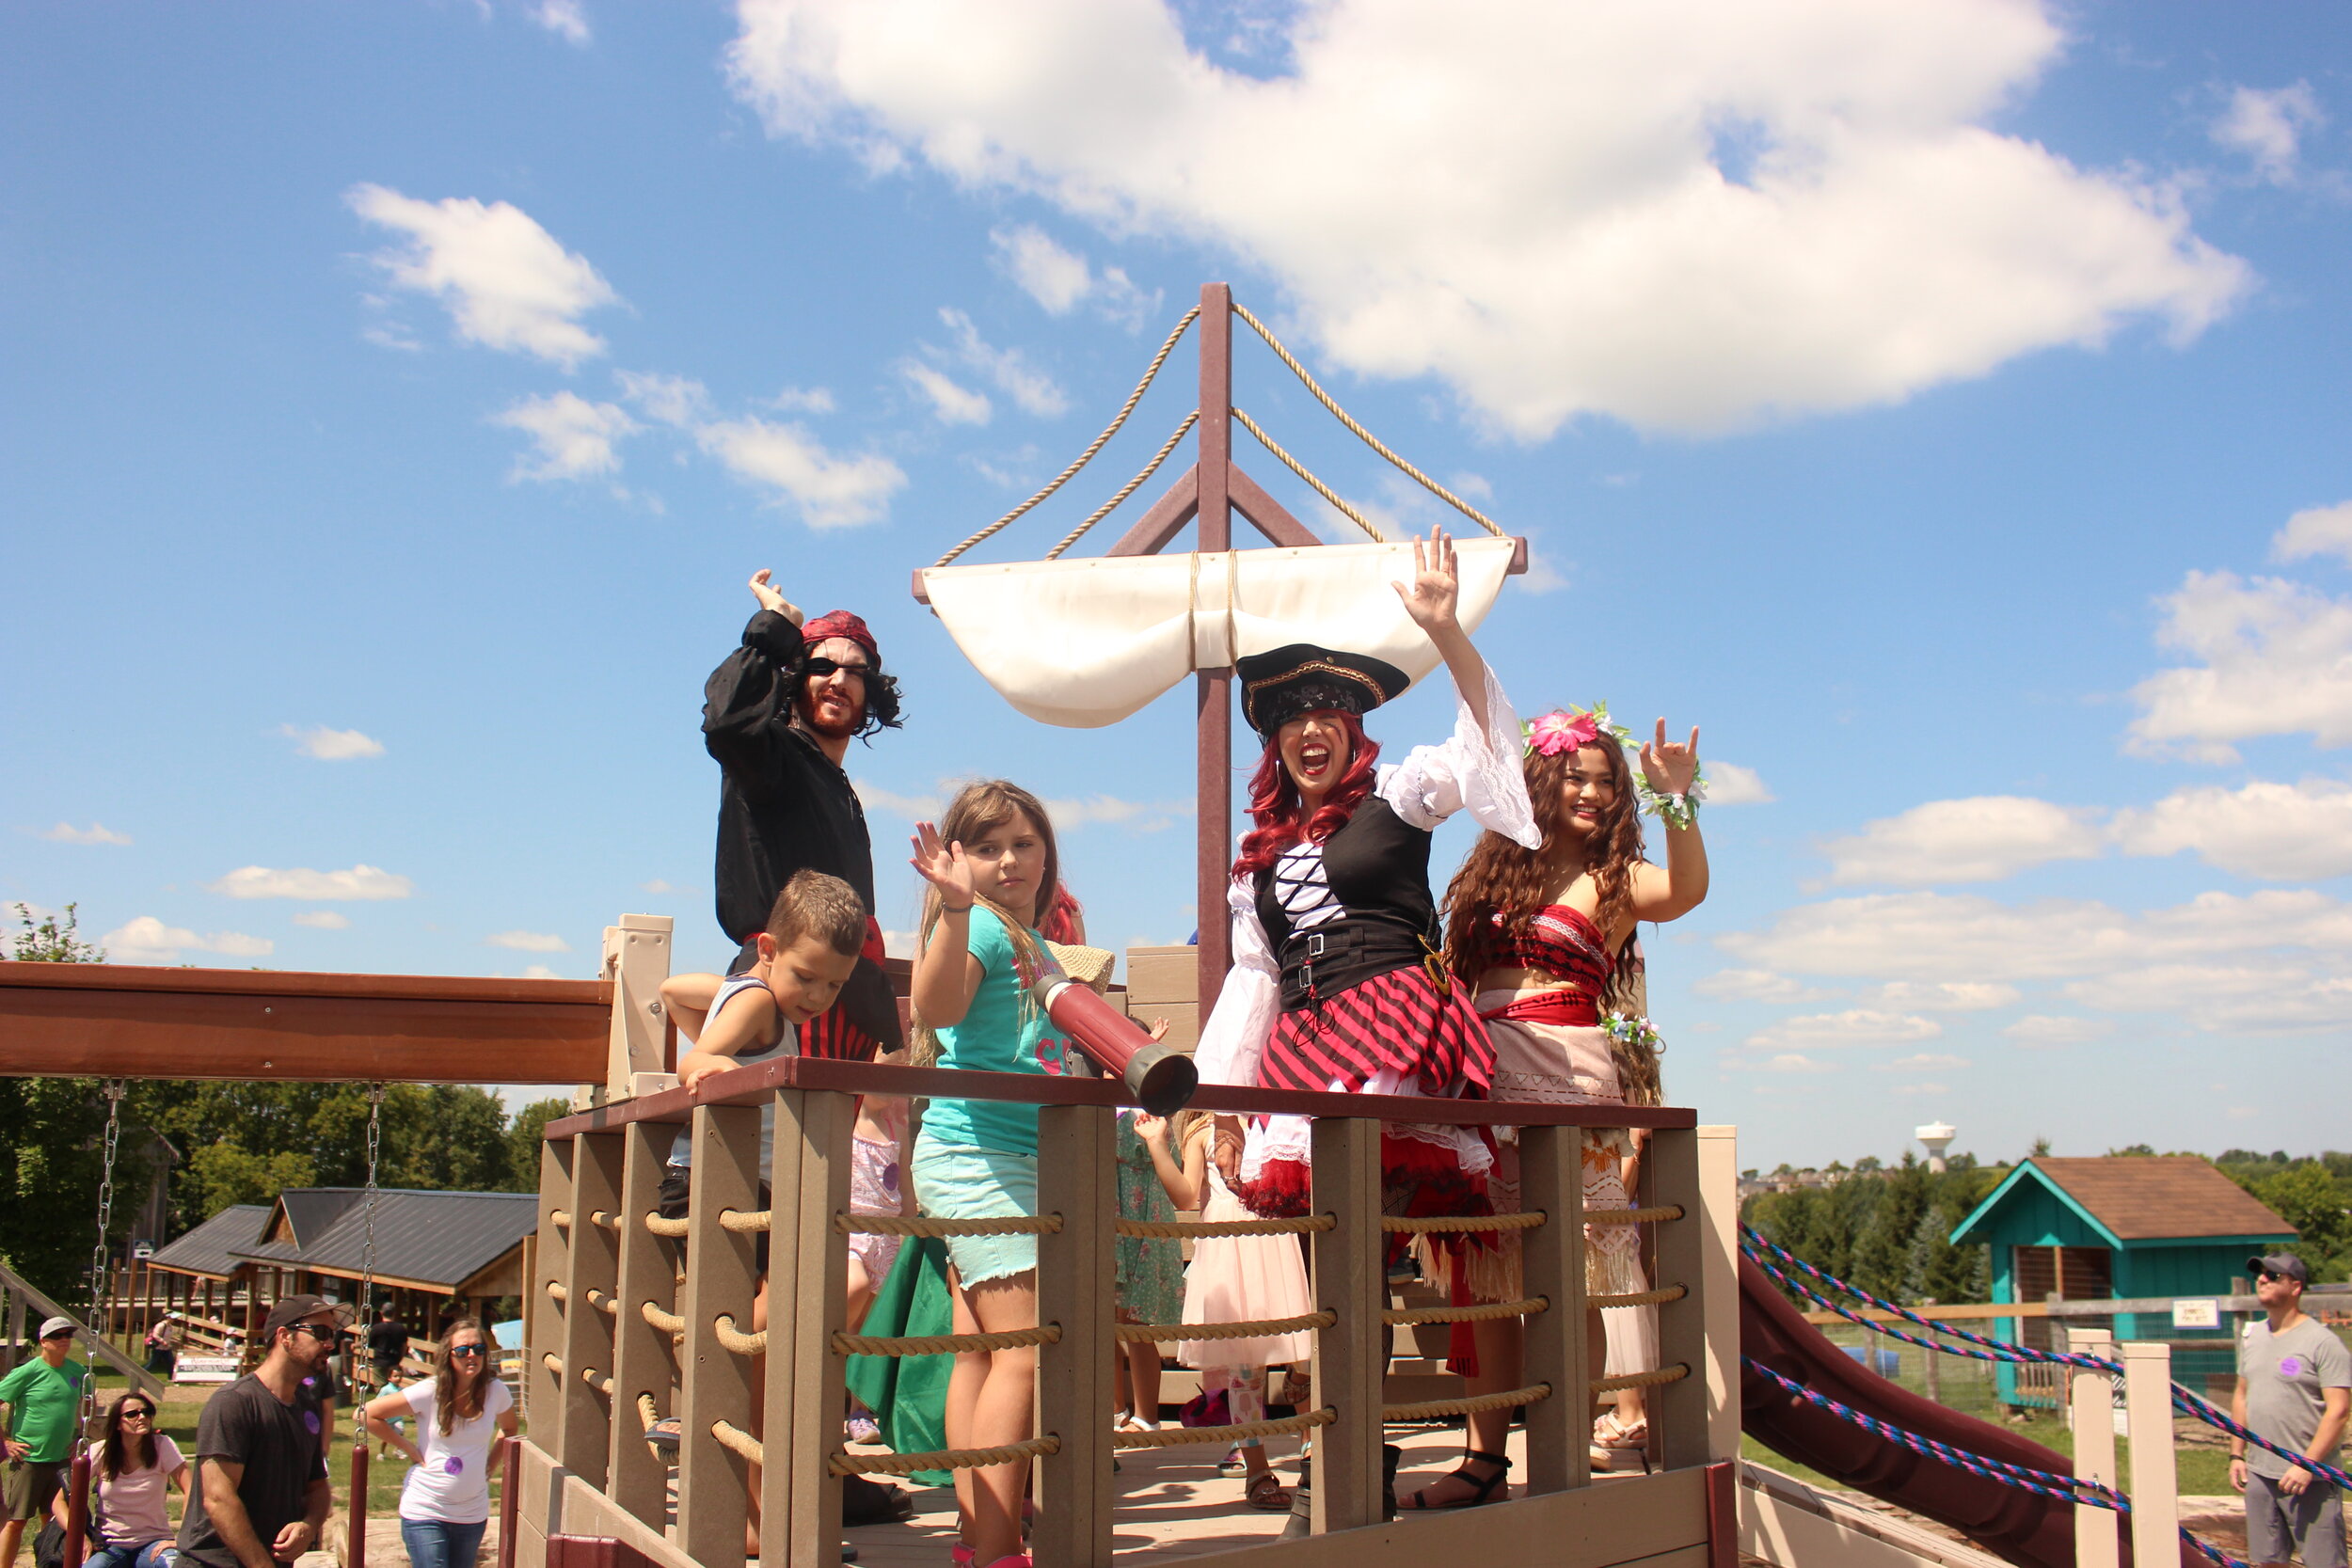 The Sneaky Pirates on a ship playground at Brooks Farms